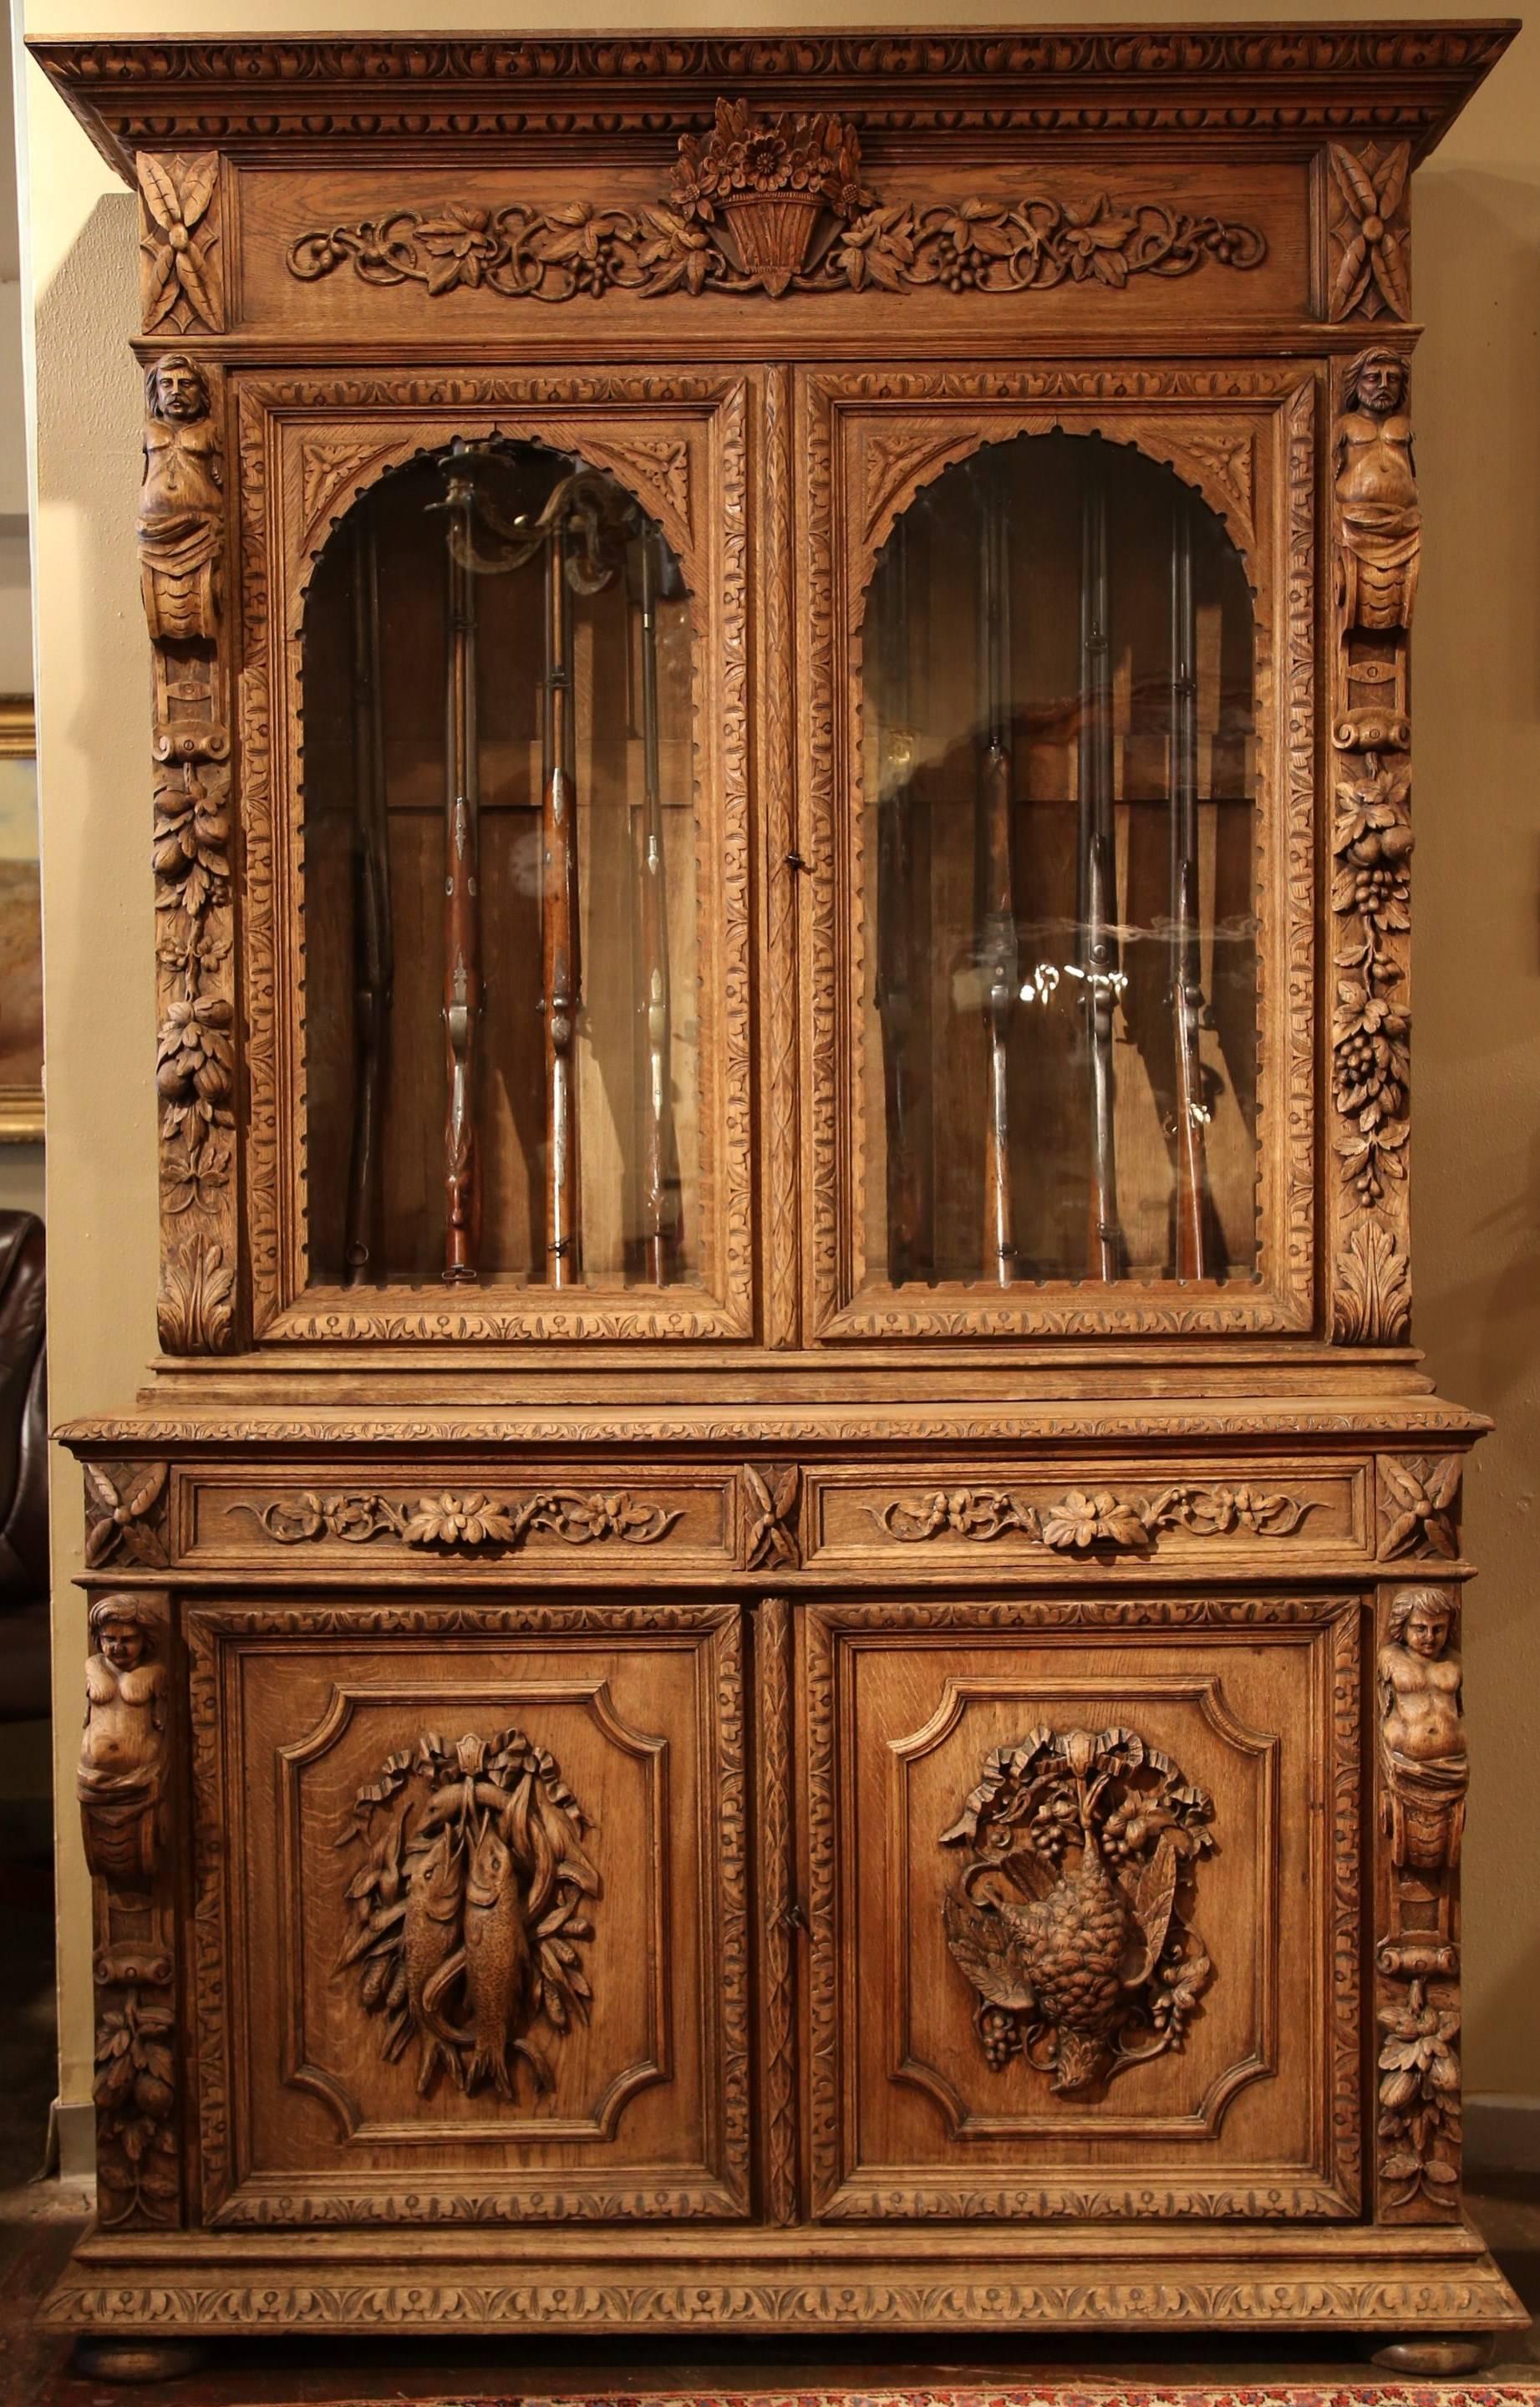 Fabulous antique heavily carved buffet deux corps from France, circa 1870. This 9-gun cabinet has been stripped and refinished in a lighter color. Representing 